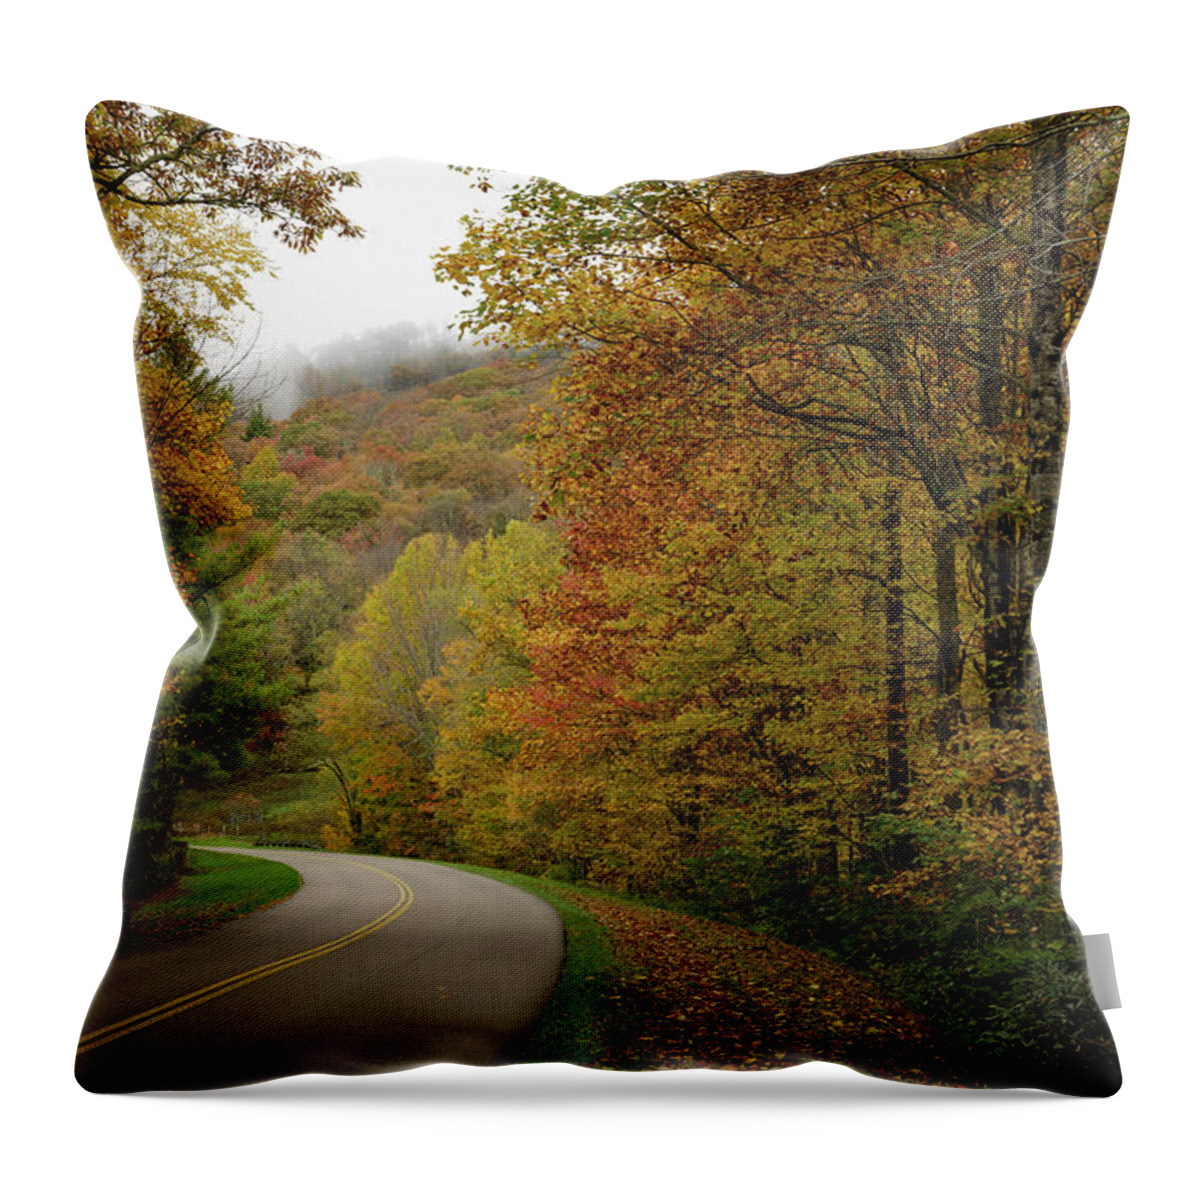 Curvy Road Throw Pillow featuring the photograph What's Next? by Steve Templeton